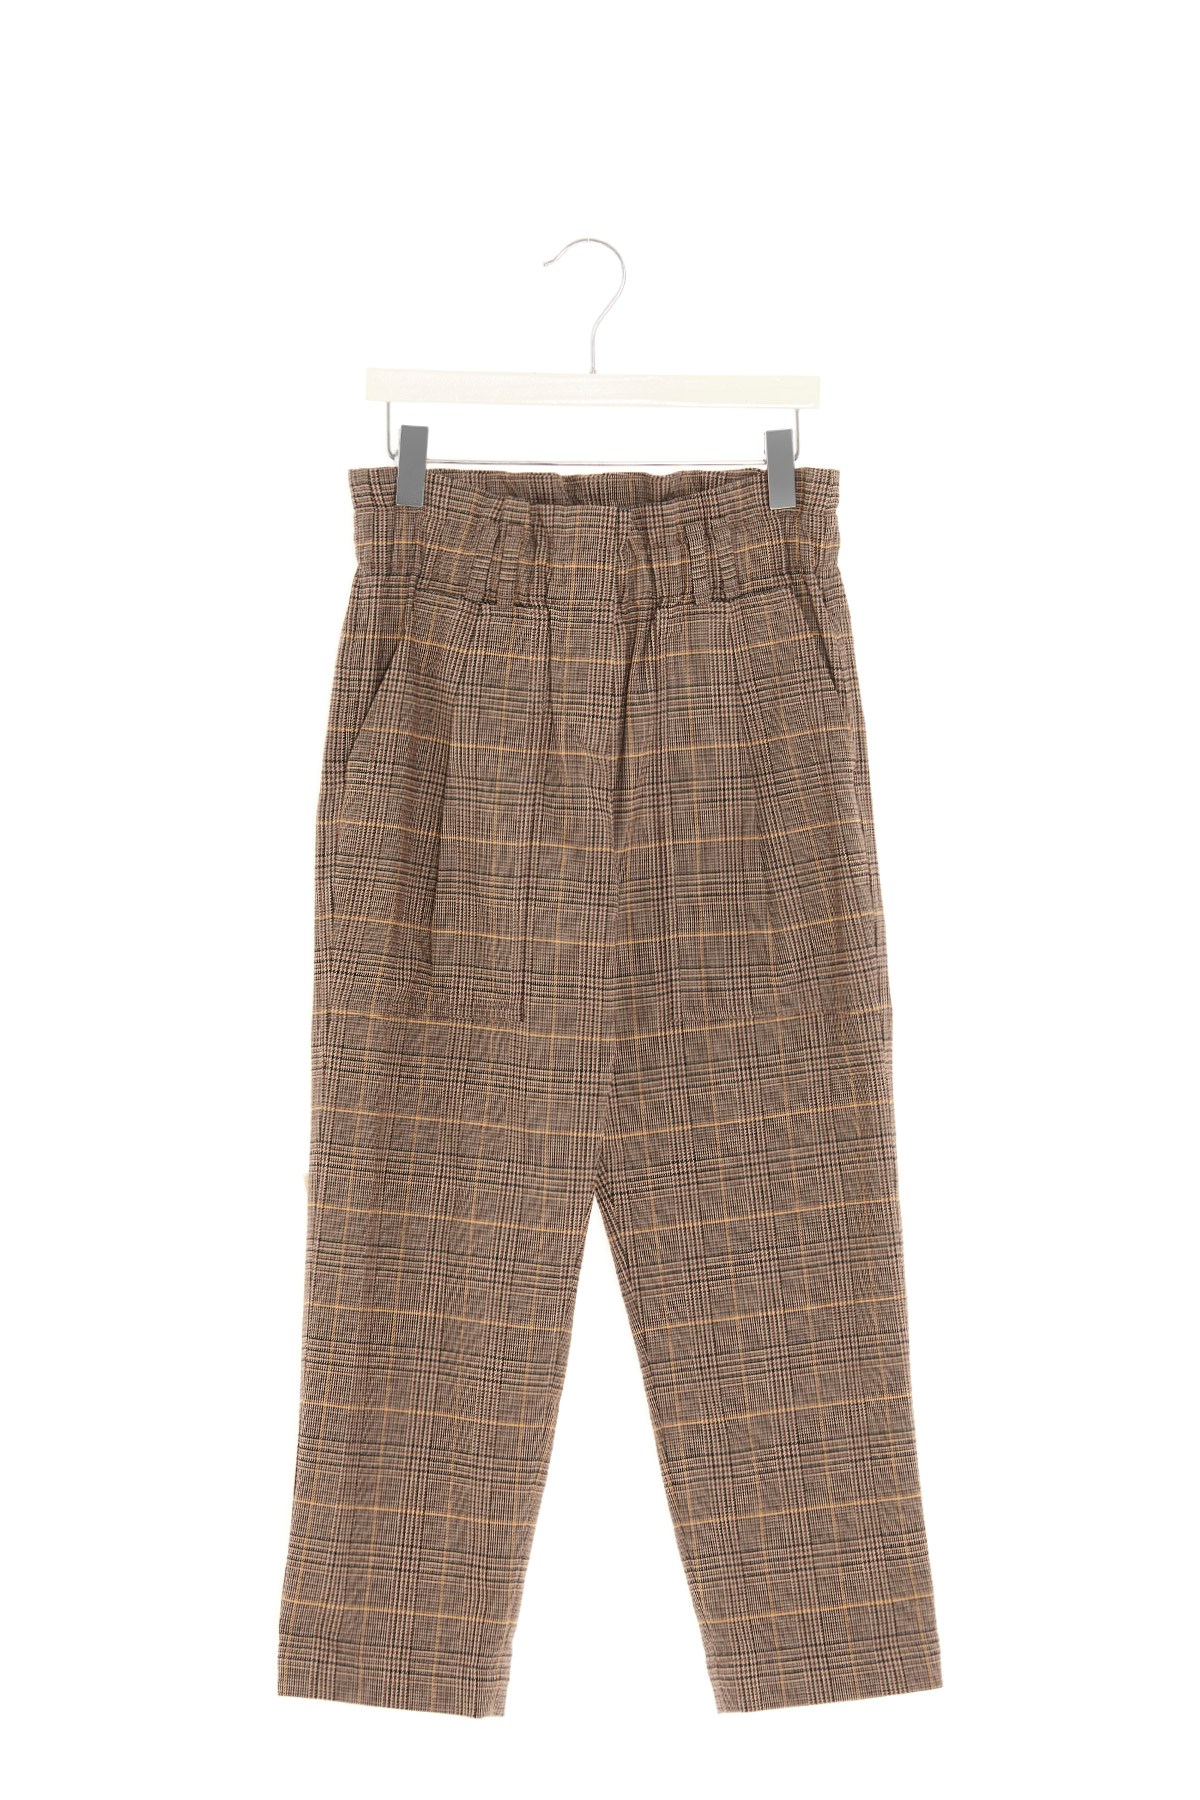 BRUNELLO CUCINELLI Hose Mit Prince-Of-Wales-Muster